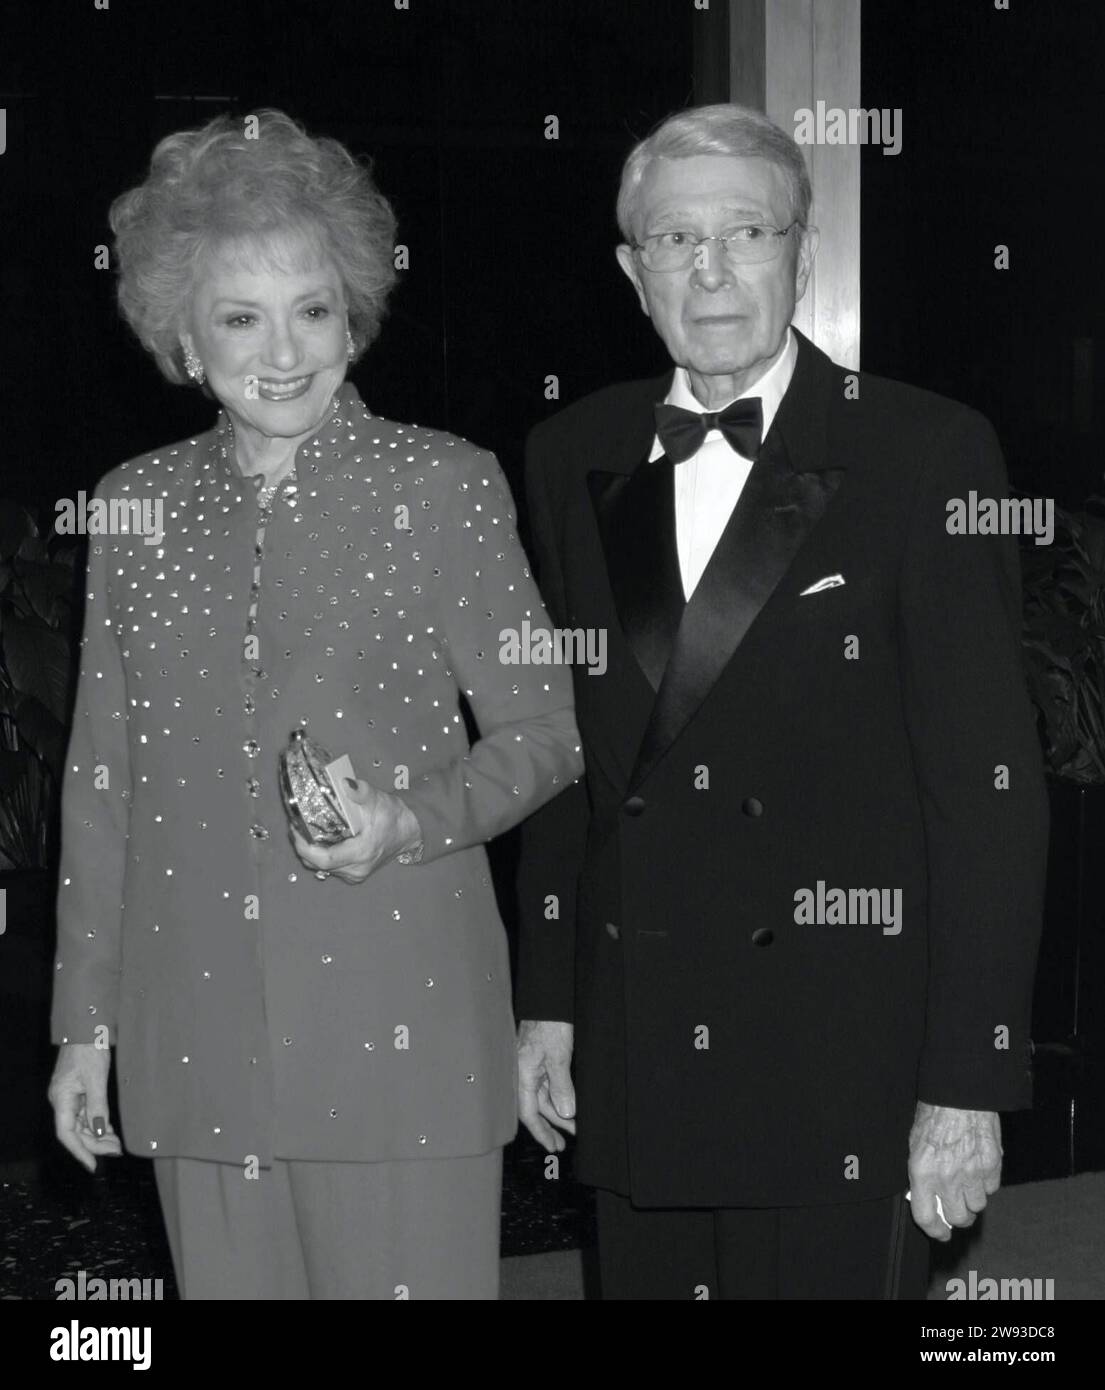 **FILE PHOTO** Selma Archerd Has Passed Away. Army Archerd and wife Selma Archerd attend the Kennedy Center Honors Trustees Dinner at the Department of State in Washington, DC on December 4, 2004. Photo Copyright: xHenryxMcGeex Stock Photo